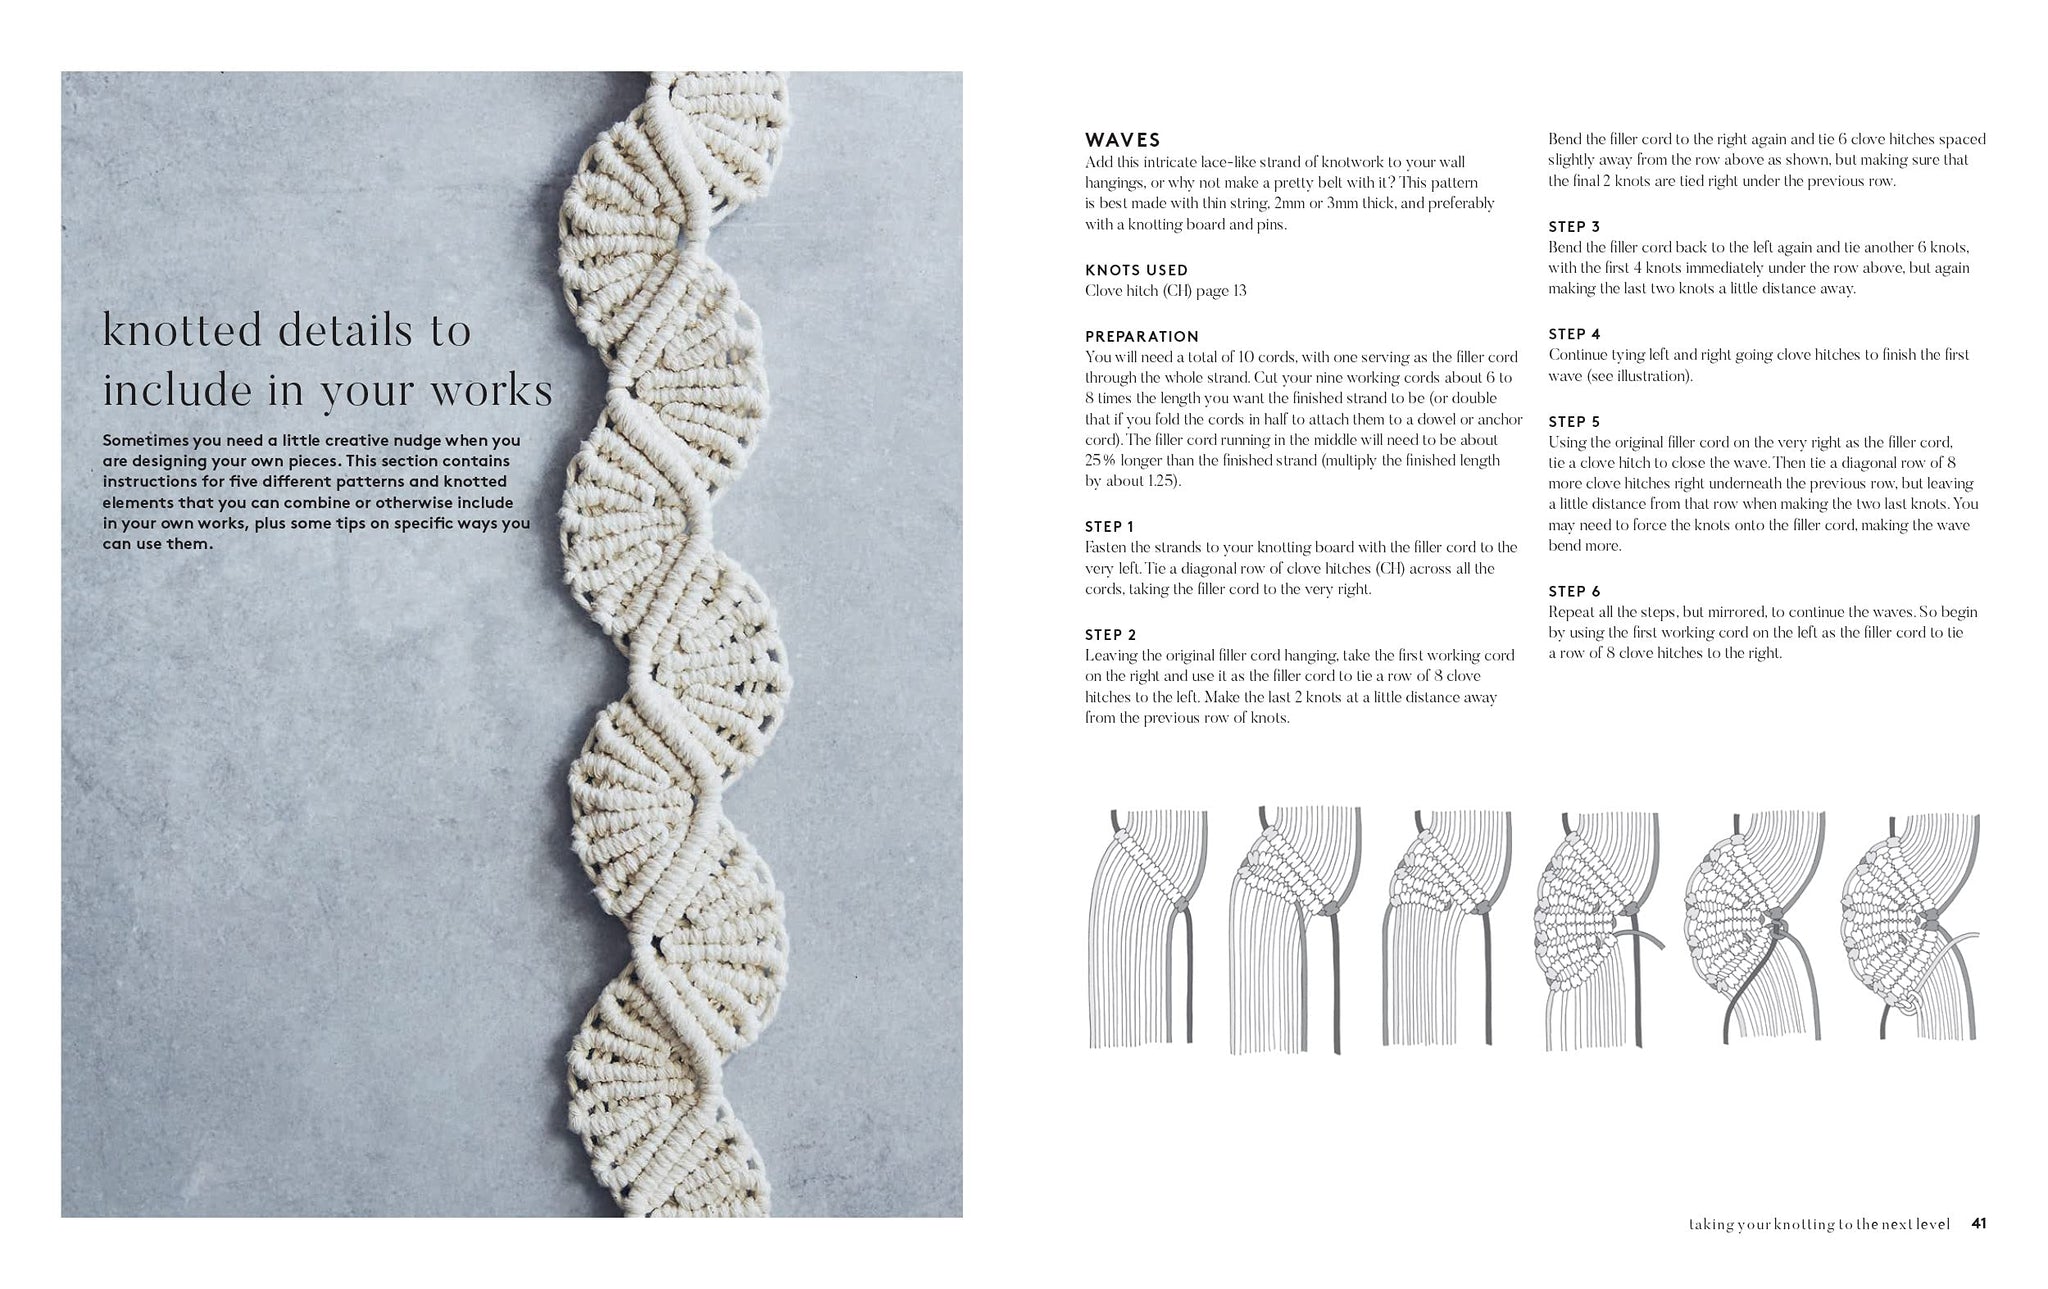 BookMacrame 2:How to take your knotting to the next level(by Createa –  Macranova